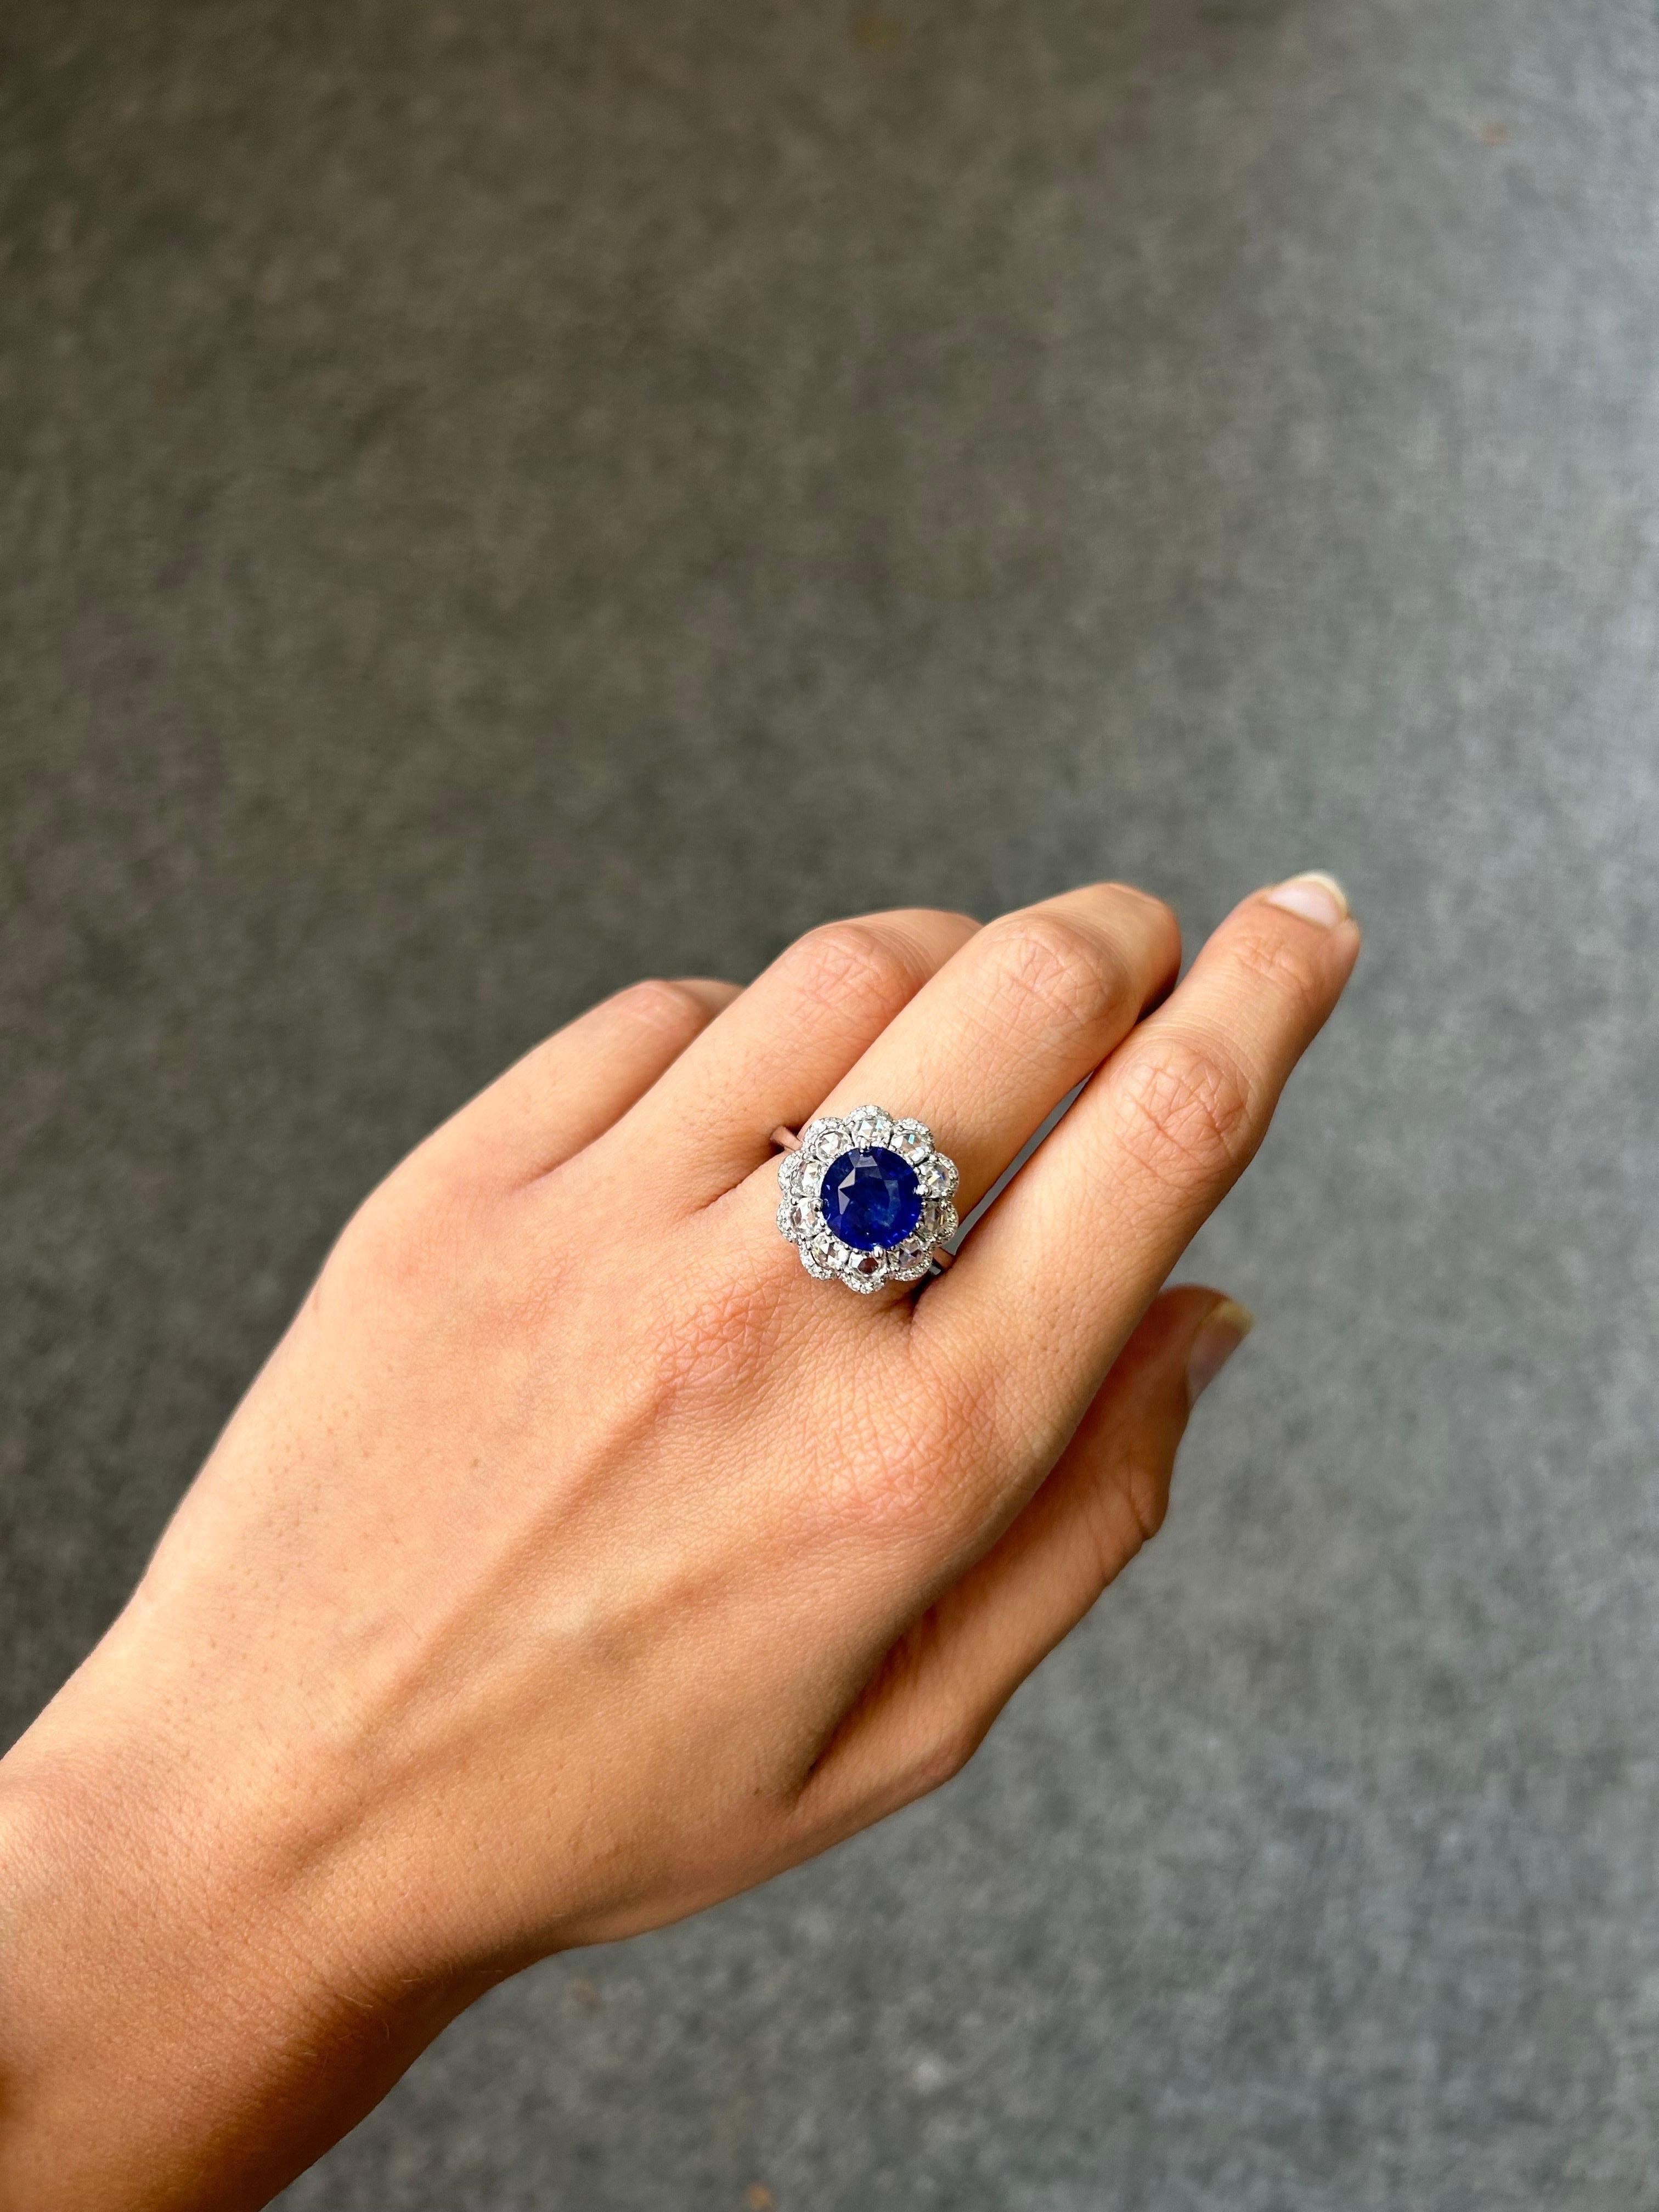 This custom-made 18k gold cocktail cluster ring features an exceptional display of craftsmanship and imaginative design, perfect for those who love the incredible color of high-quality sapphire. A round faceted cut Sri Lankan deep royal blue